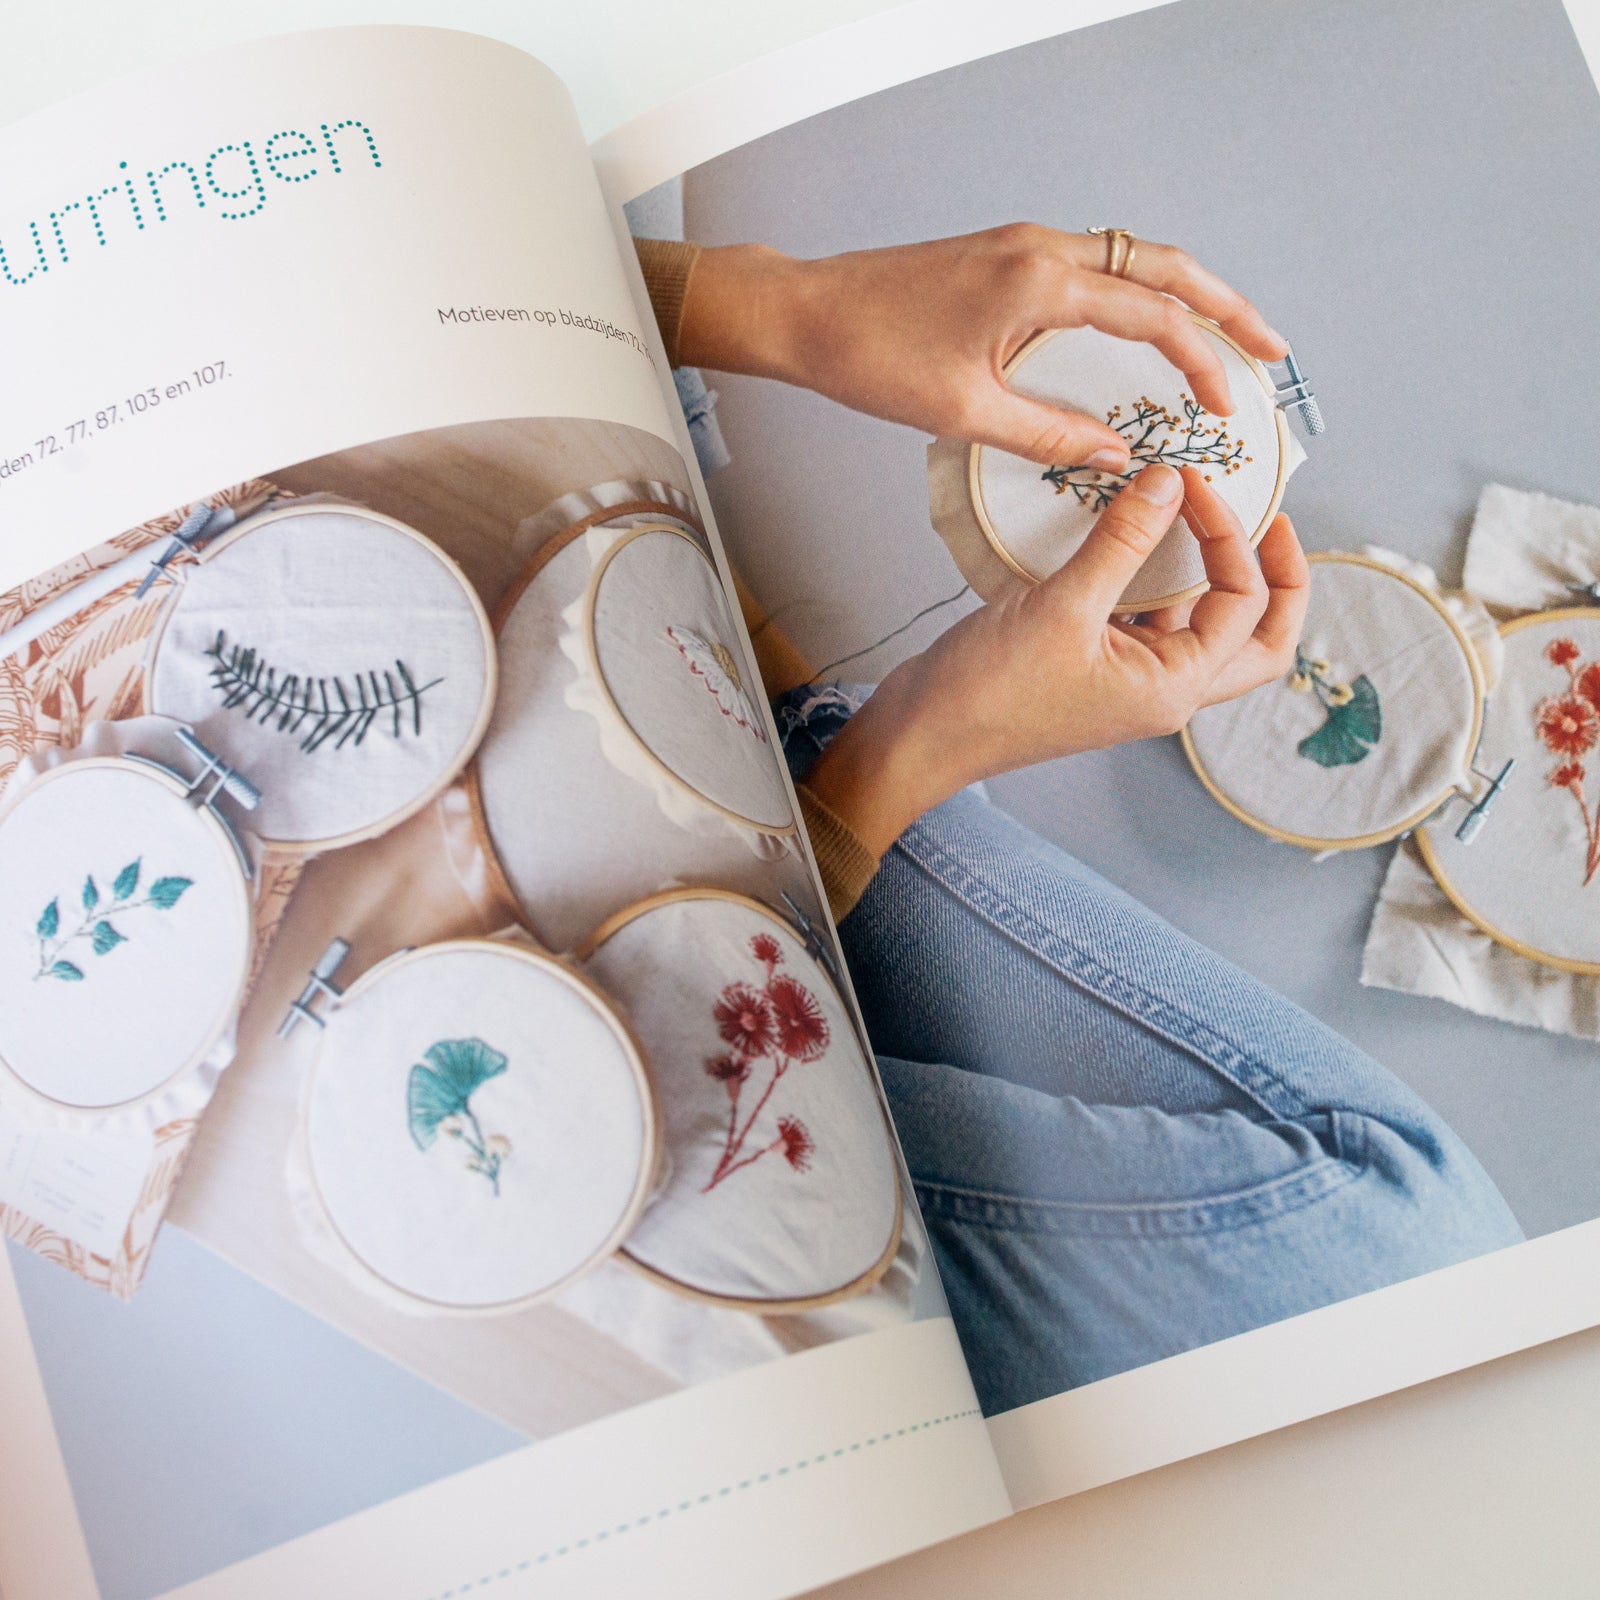 Embroider nature by Pascale Poupon